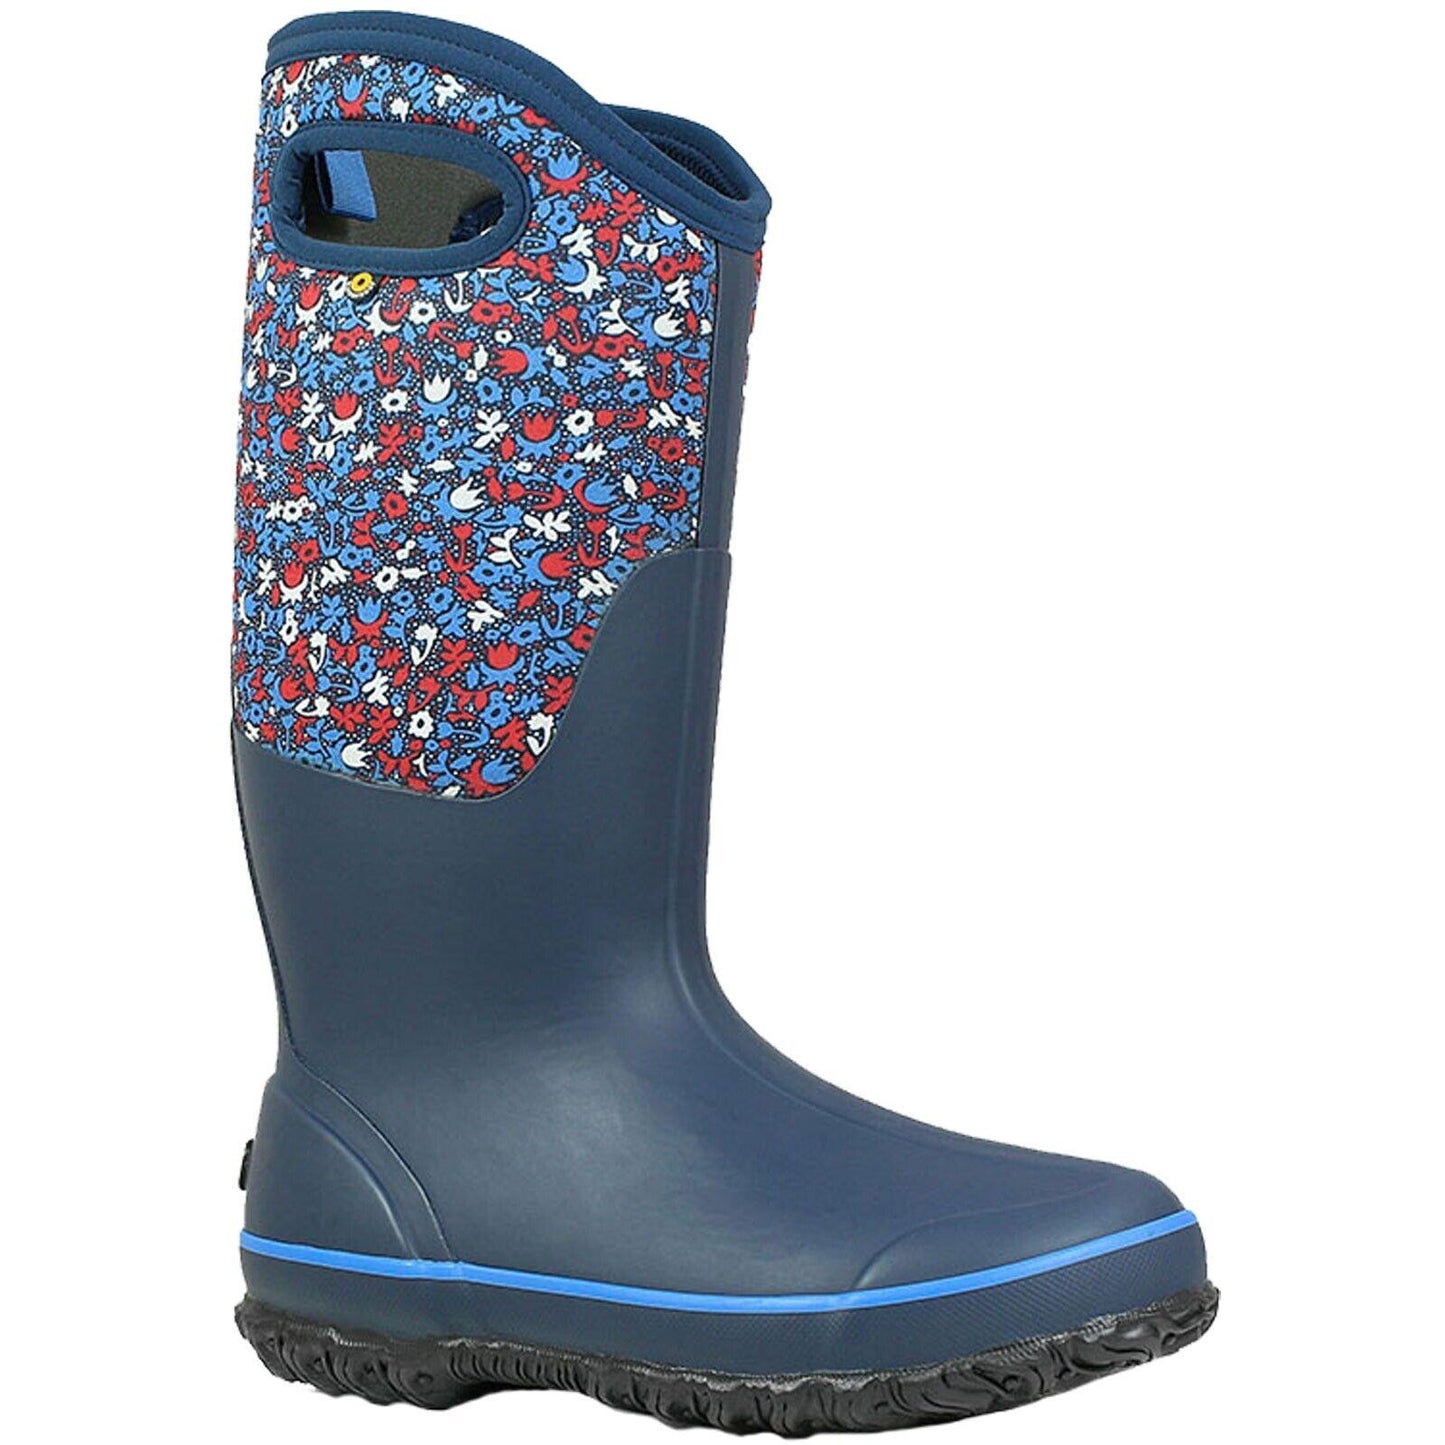 Ladies BOGS Classic Tall Freckle Blue Waterproof Insulated Boots Wellies 72427